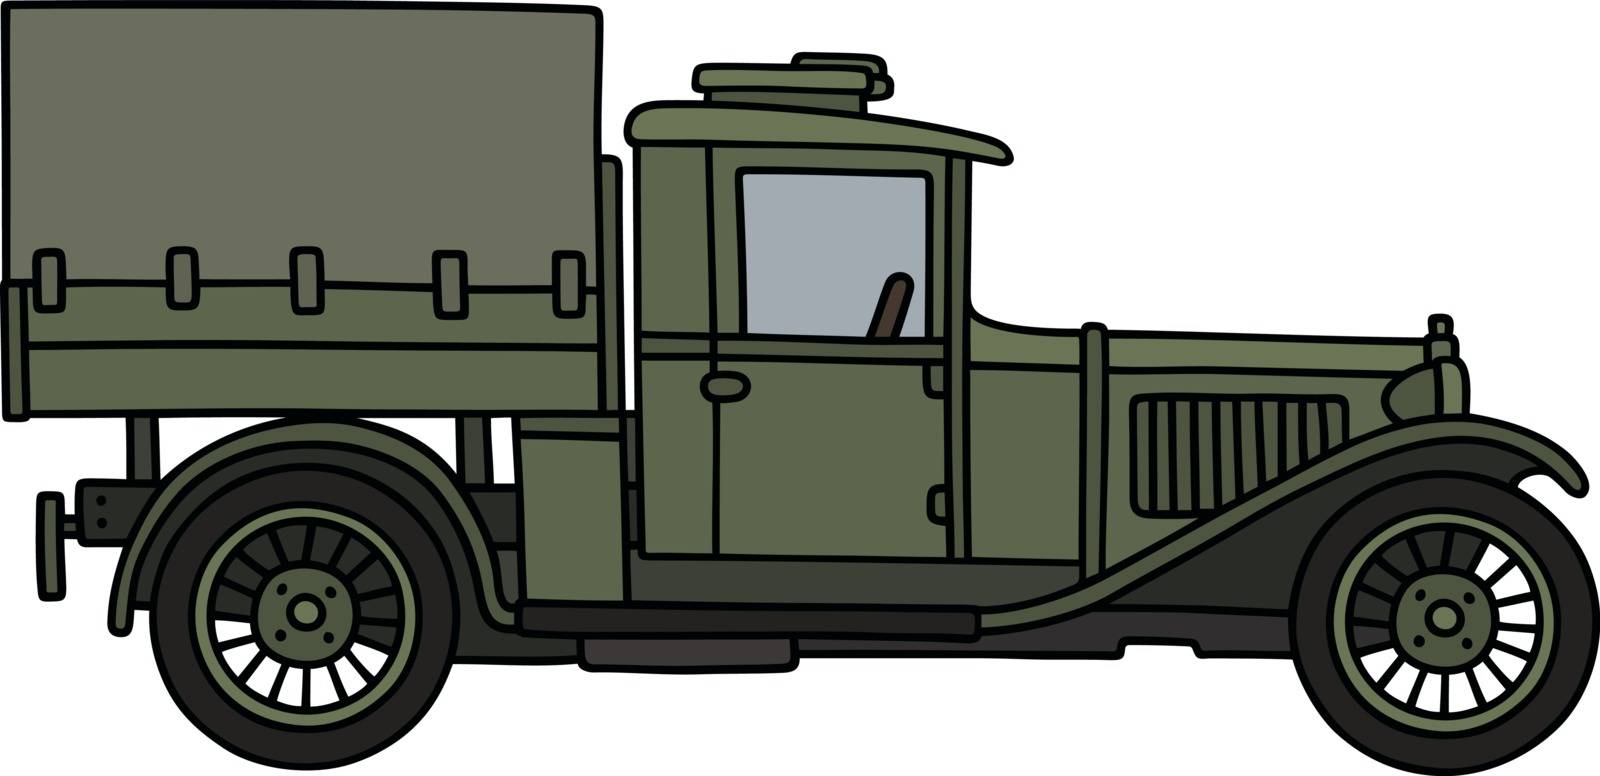 The vectorized hand drawing of a vintage military truck